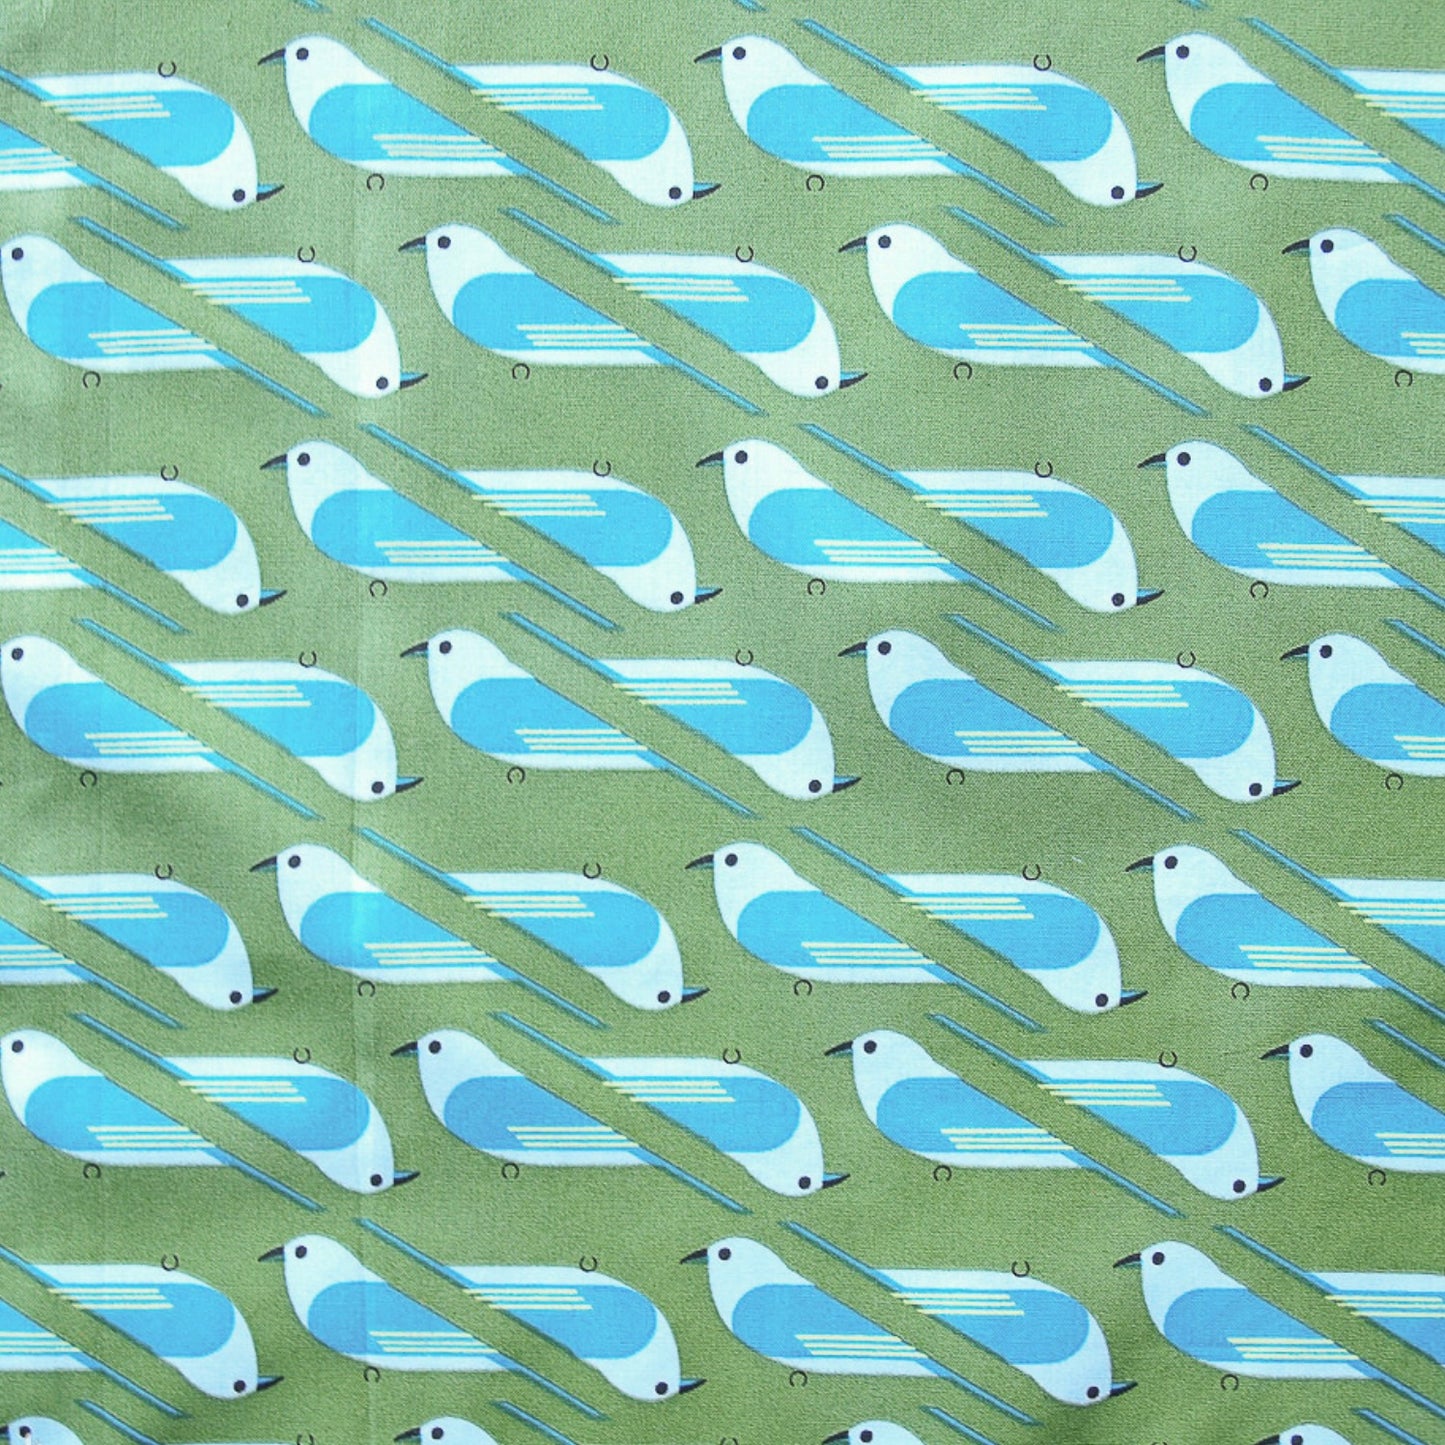 Charley Harper Discovery Place - Popeline Bluebird CH-353